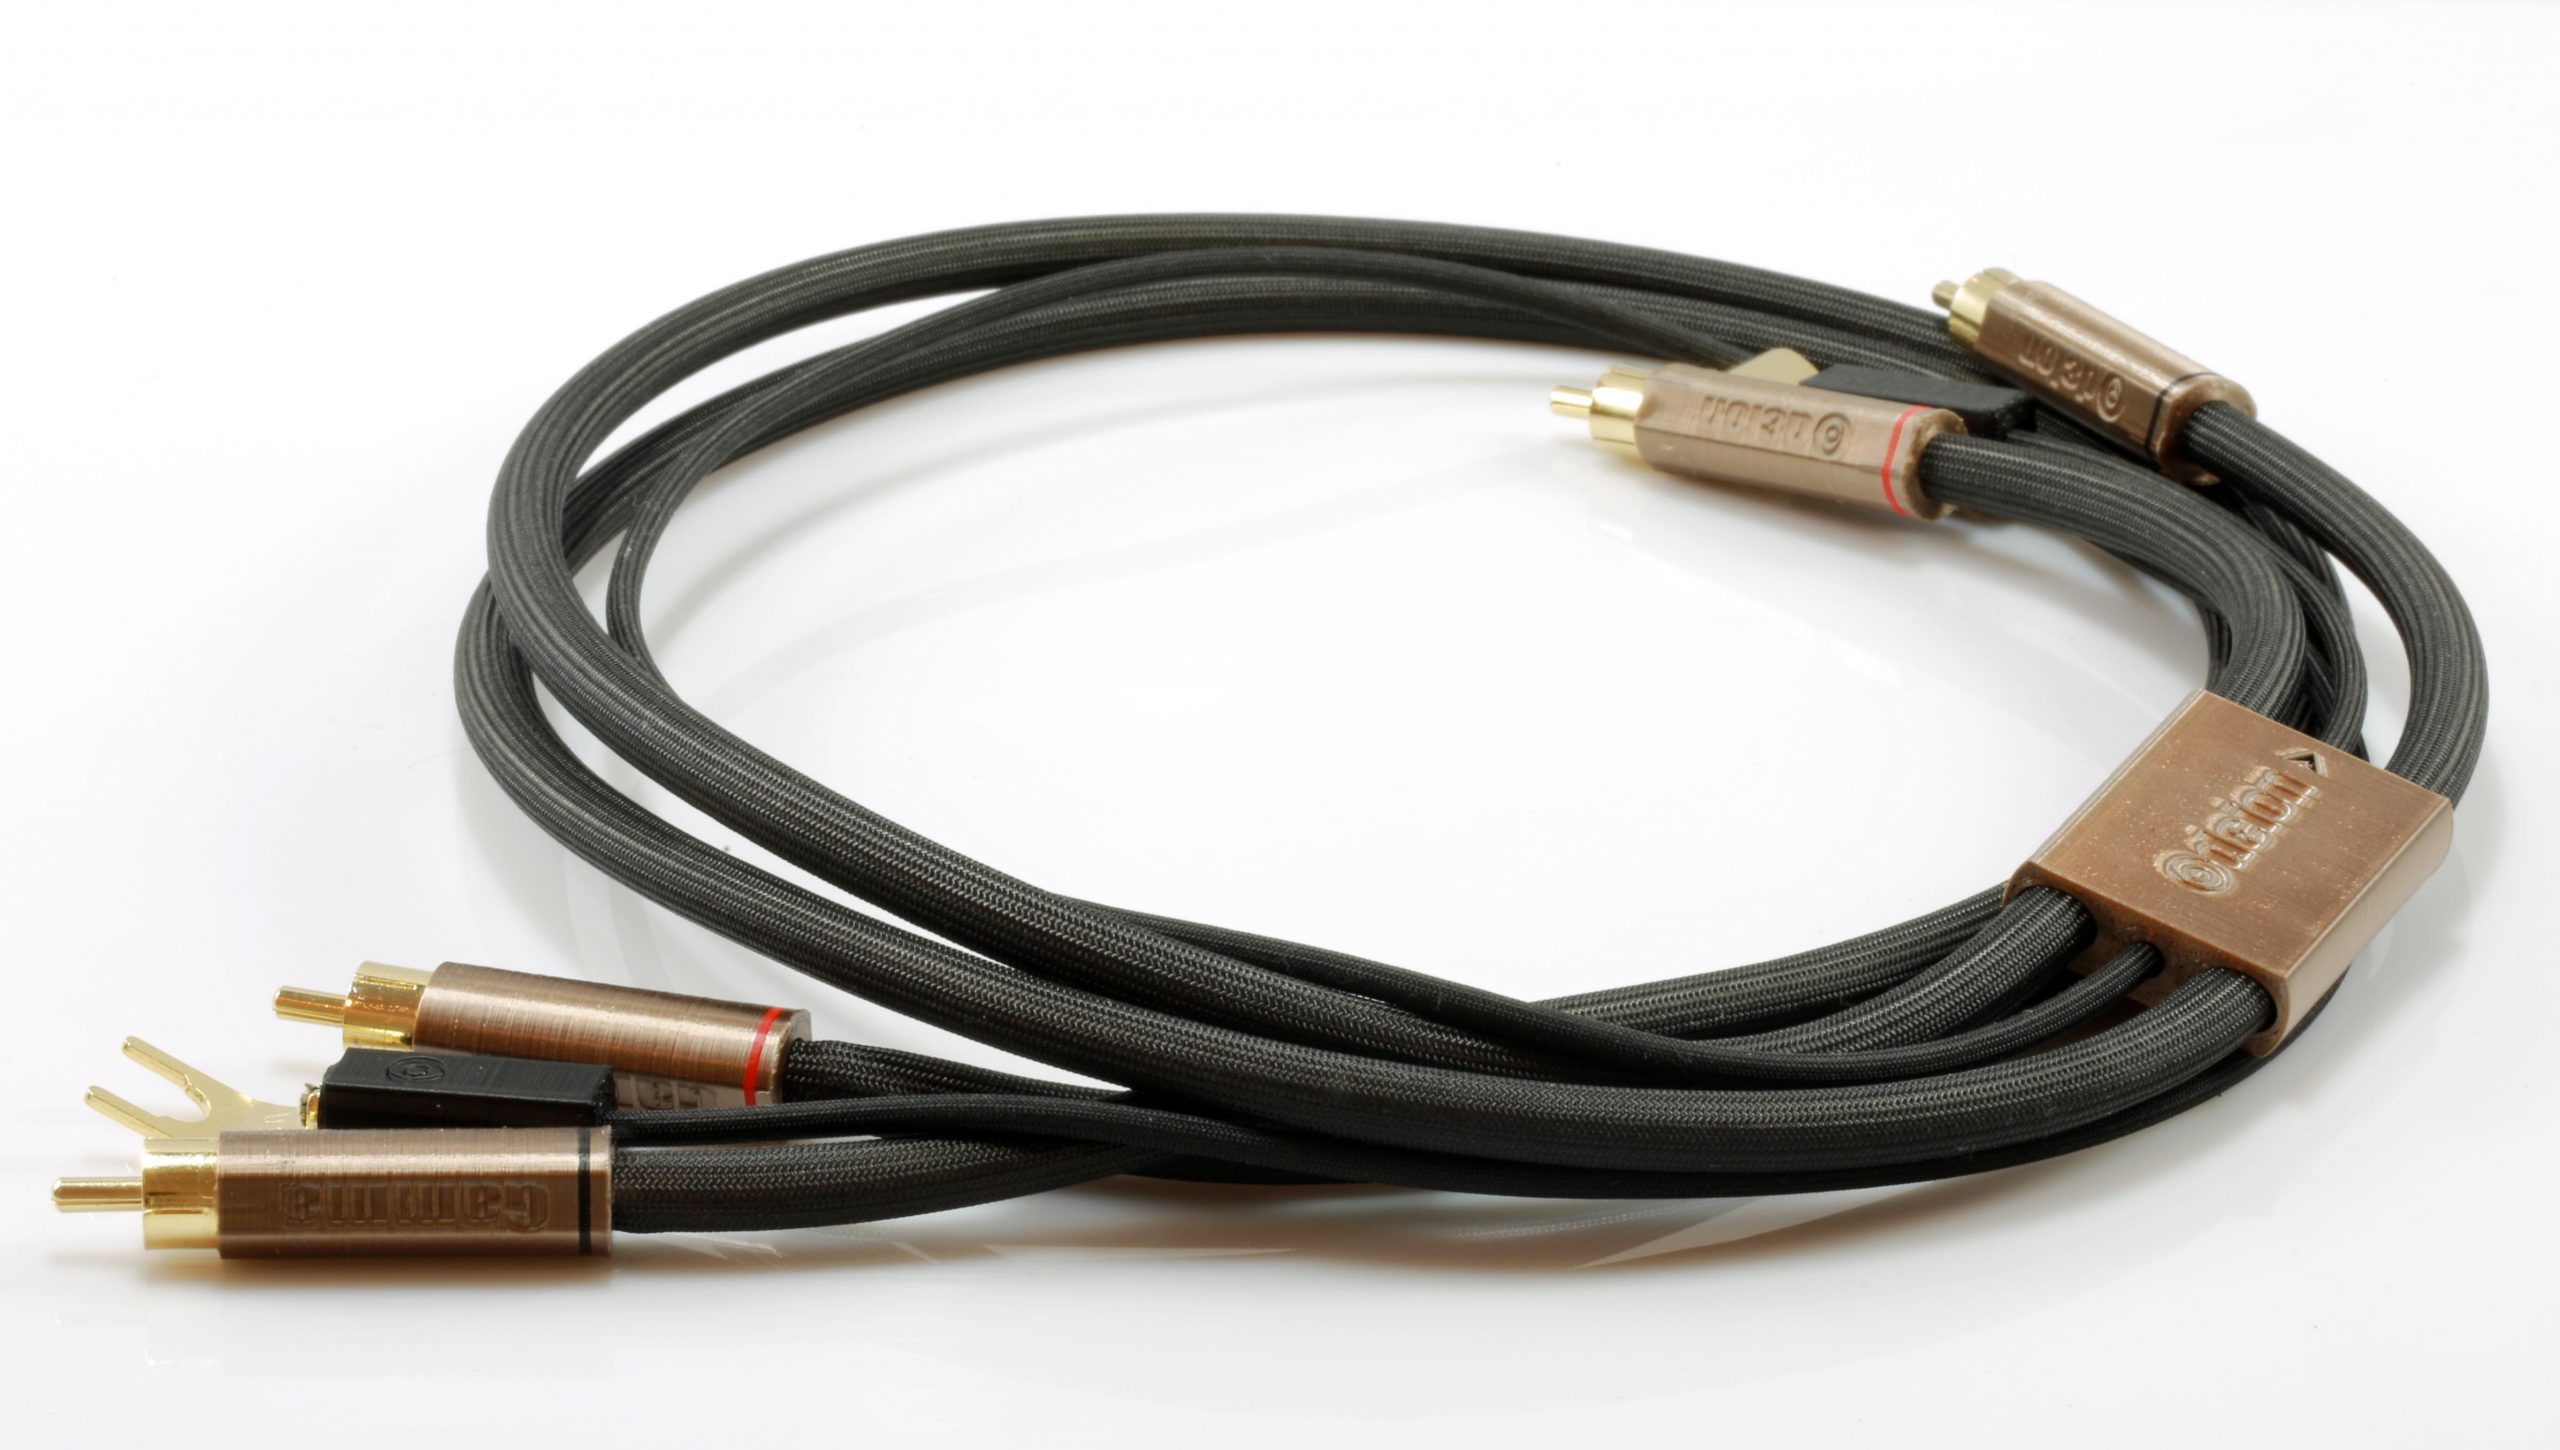 Gamma phono rca odeion cables